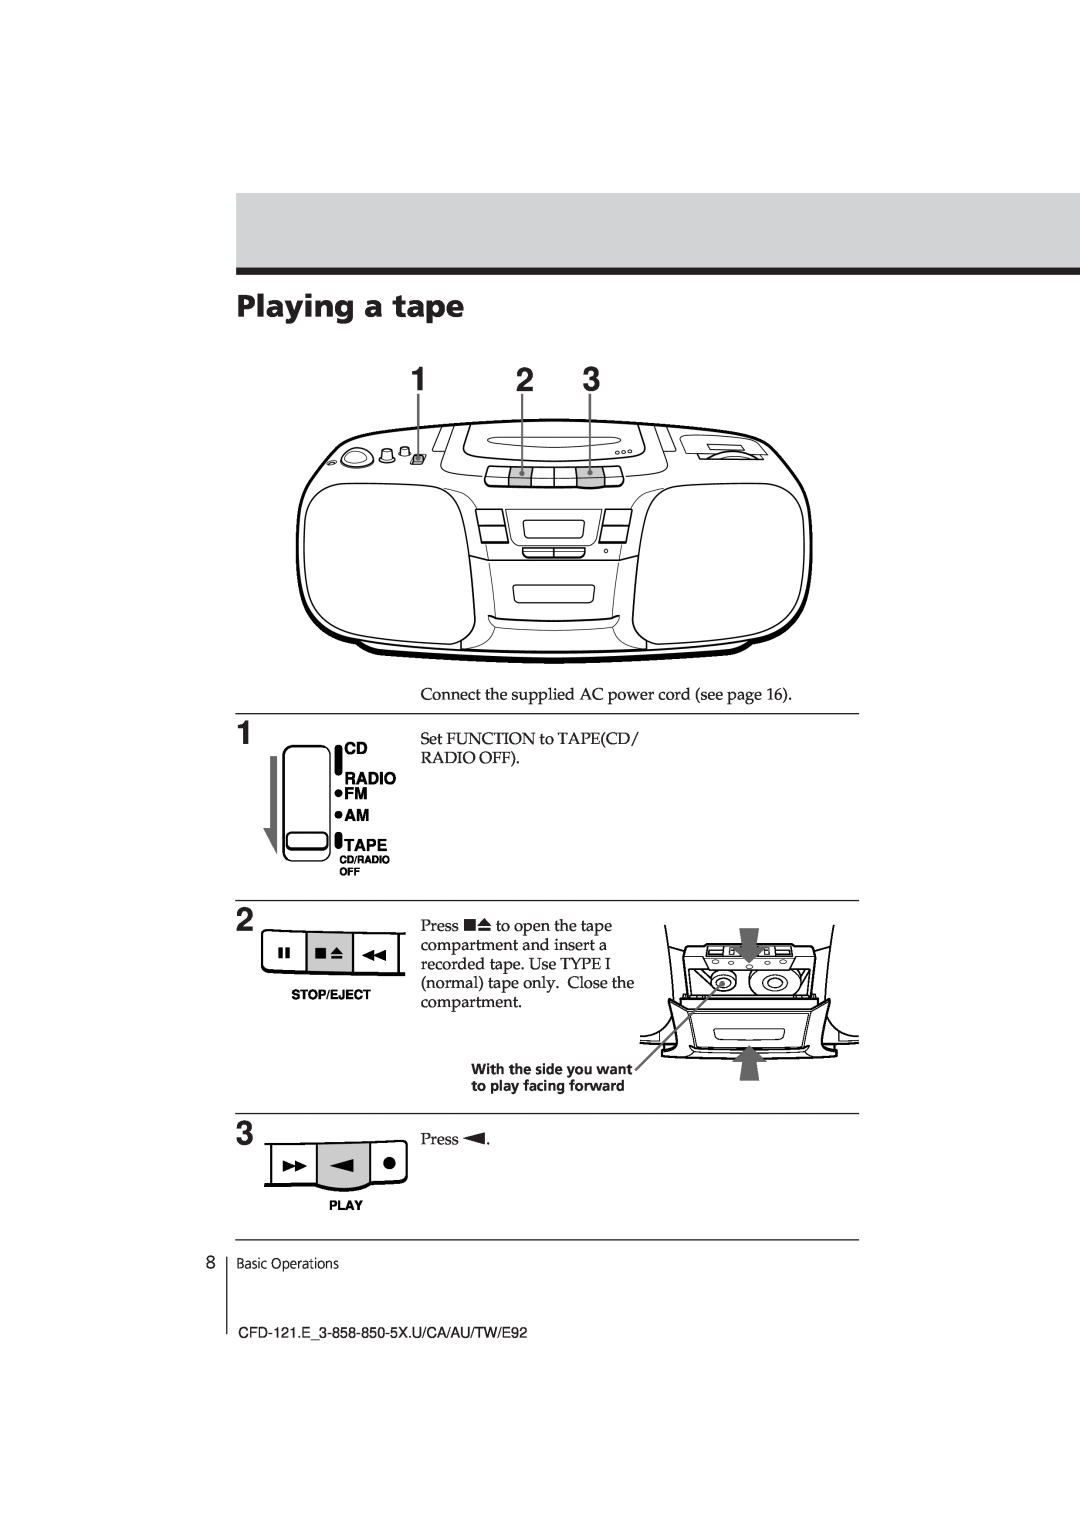 Sony CFD-121 Playing a tape, Connect the supplied AC power cord see page, Set FUNCTION to TAPECD, Radio Off, compartment 